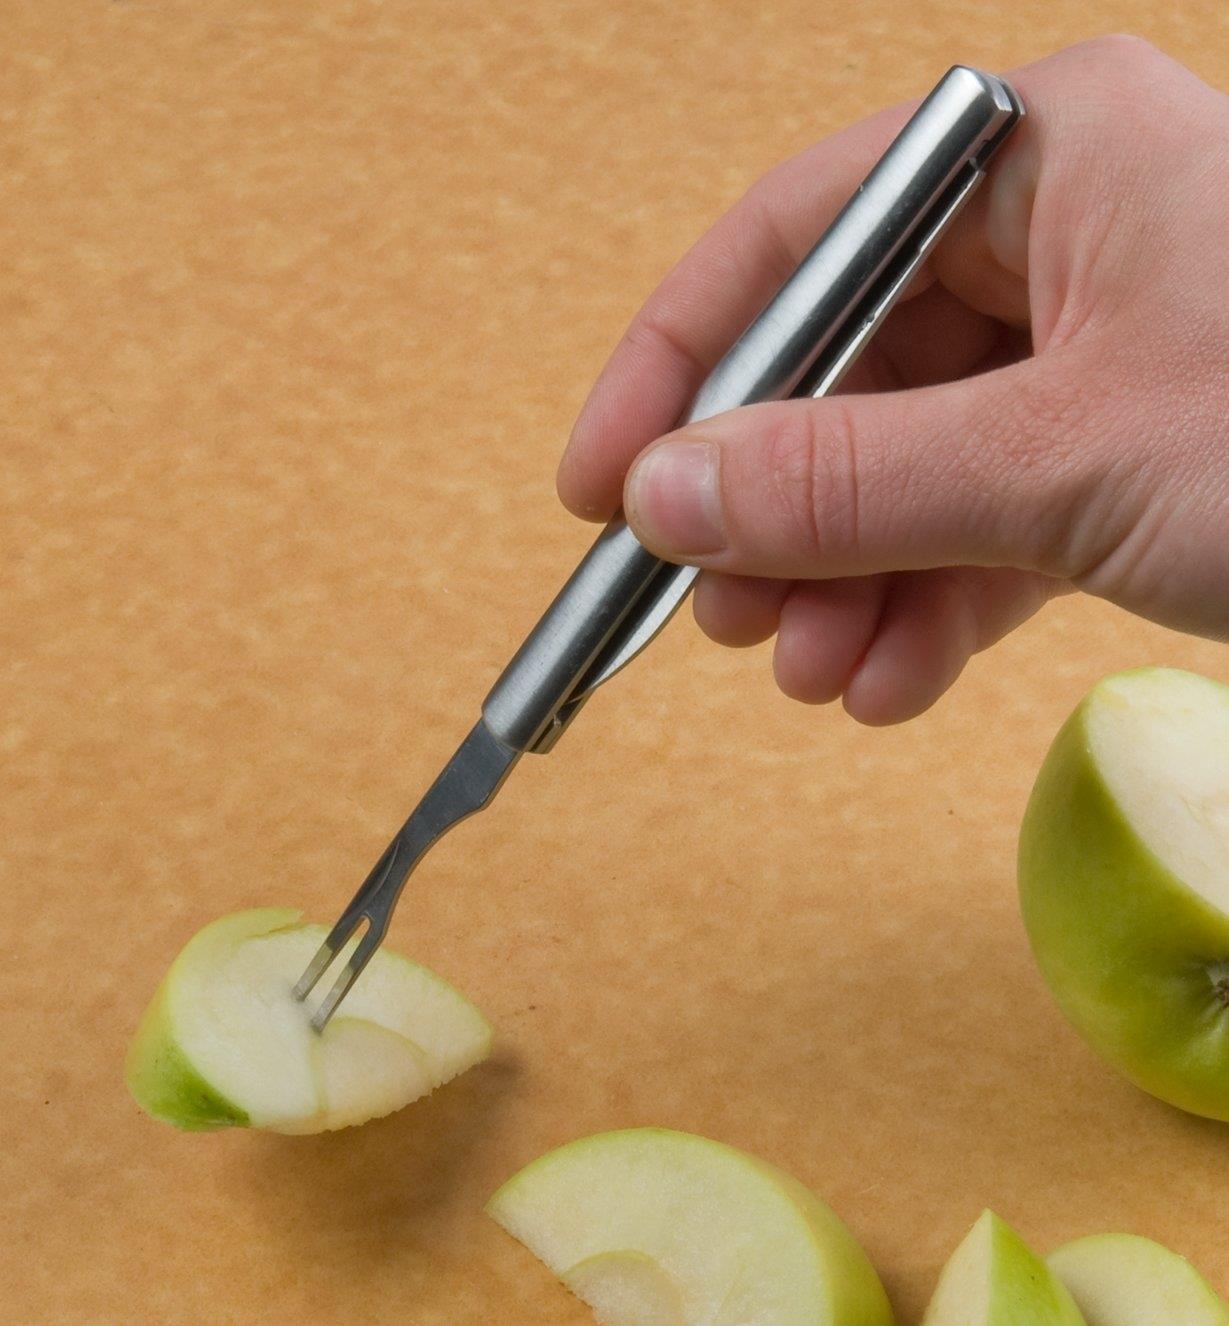 Picking up an apple slice with the fork on Folding Fruit Knife